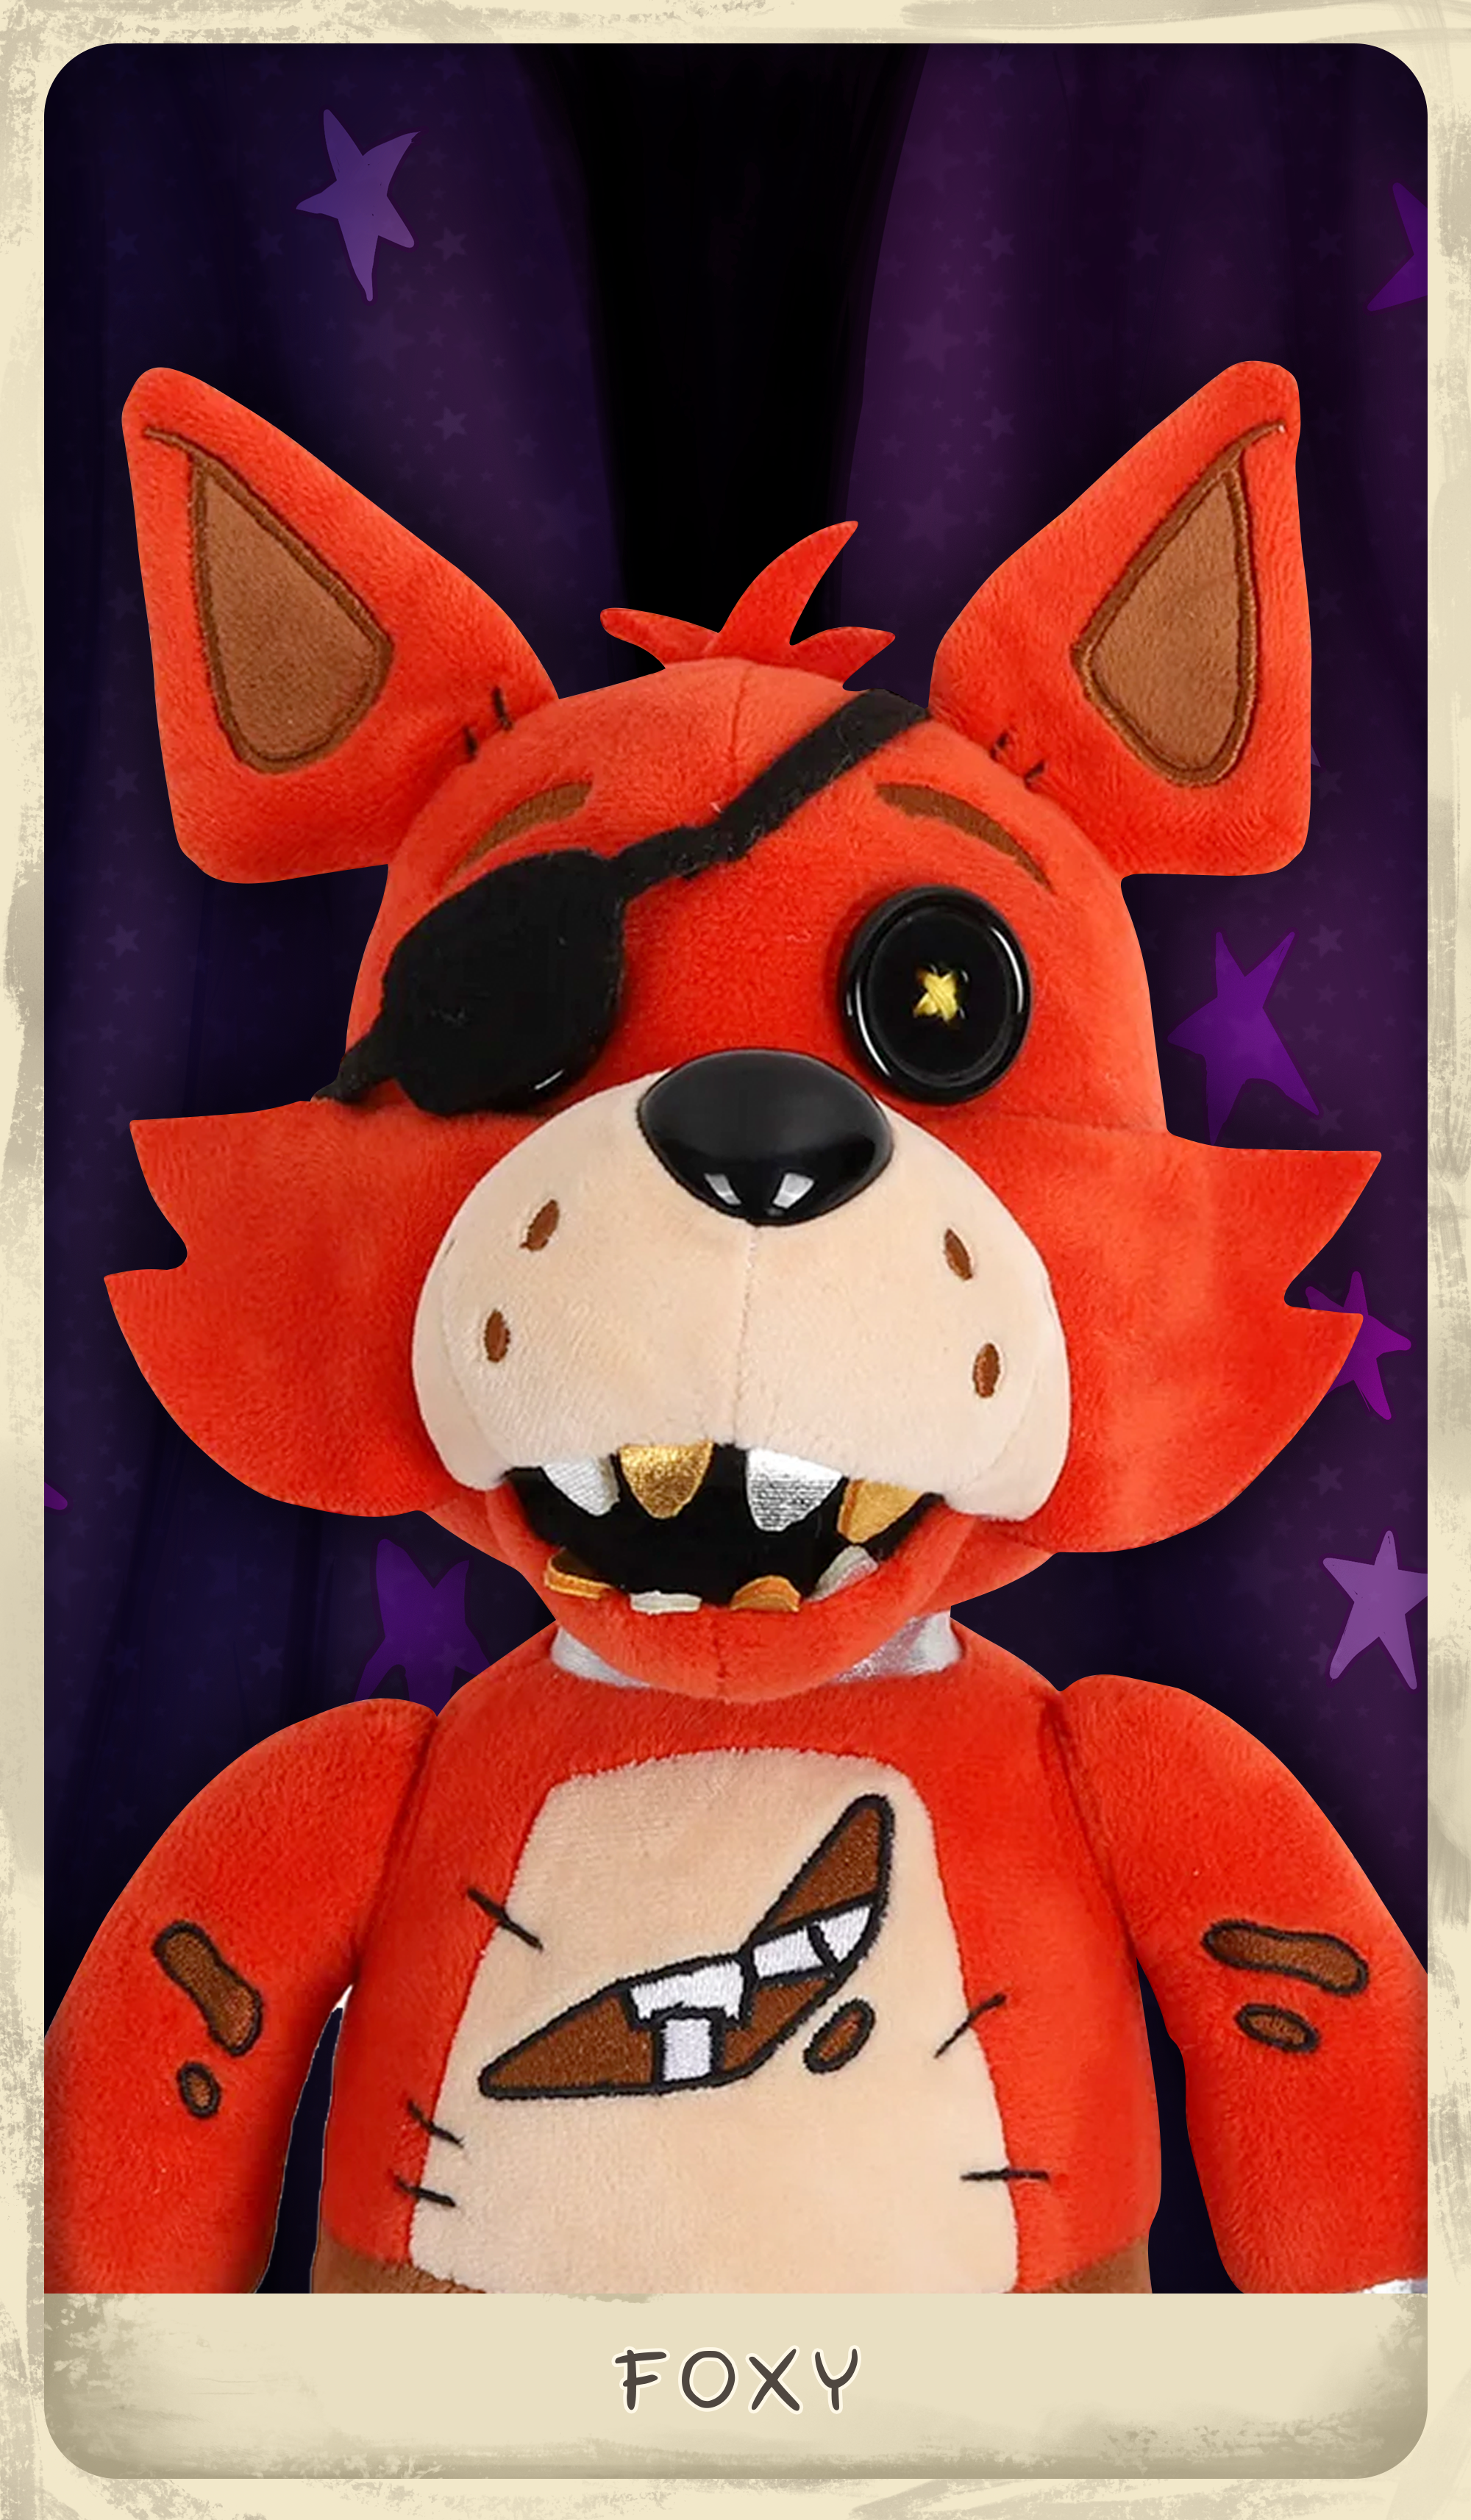 Five Nights at Freddy's Foxy the Pirate Plush